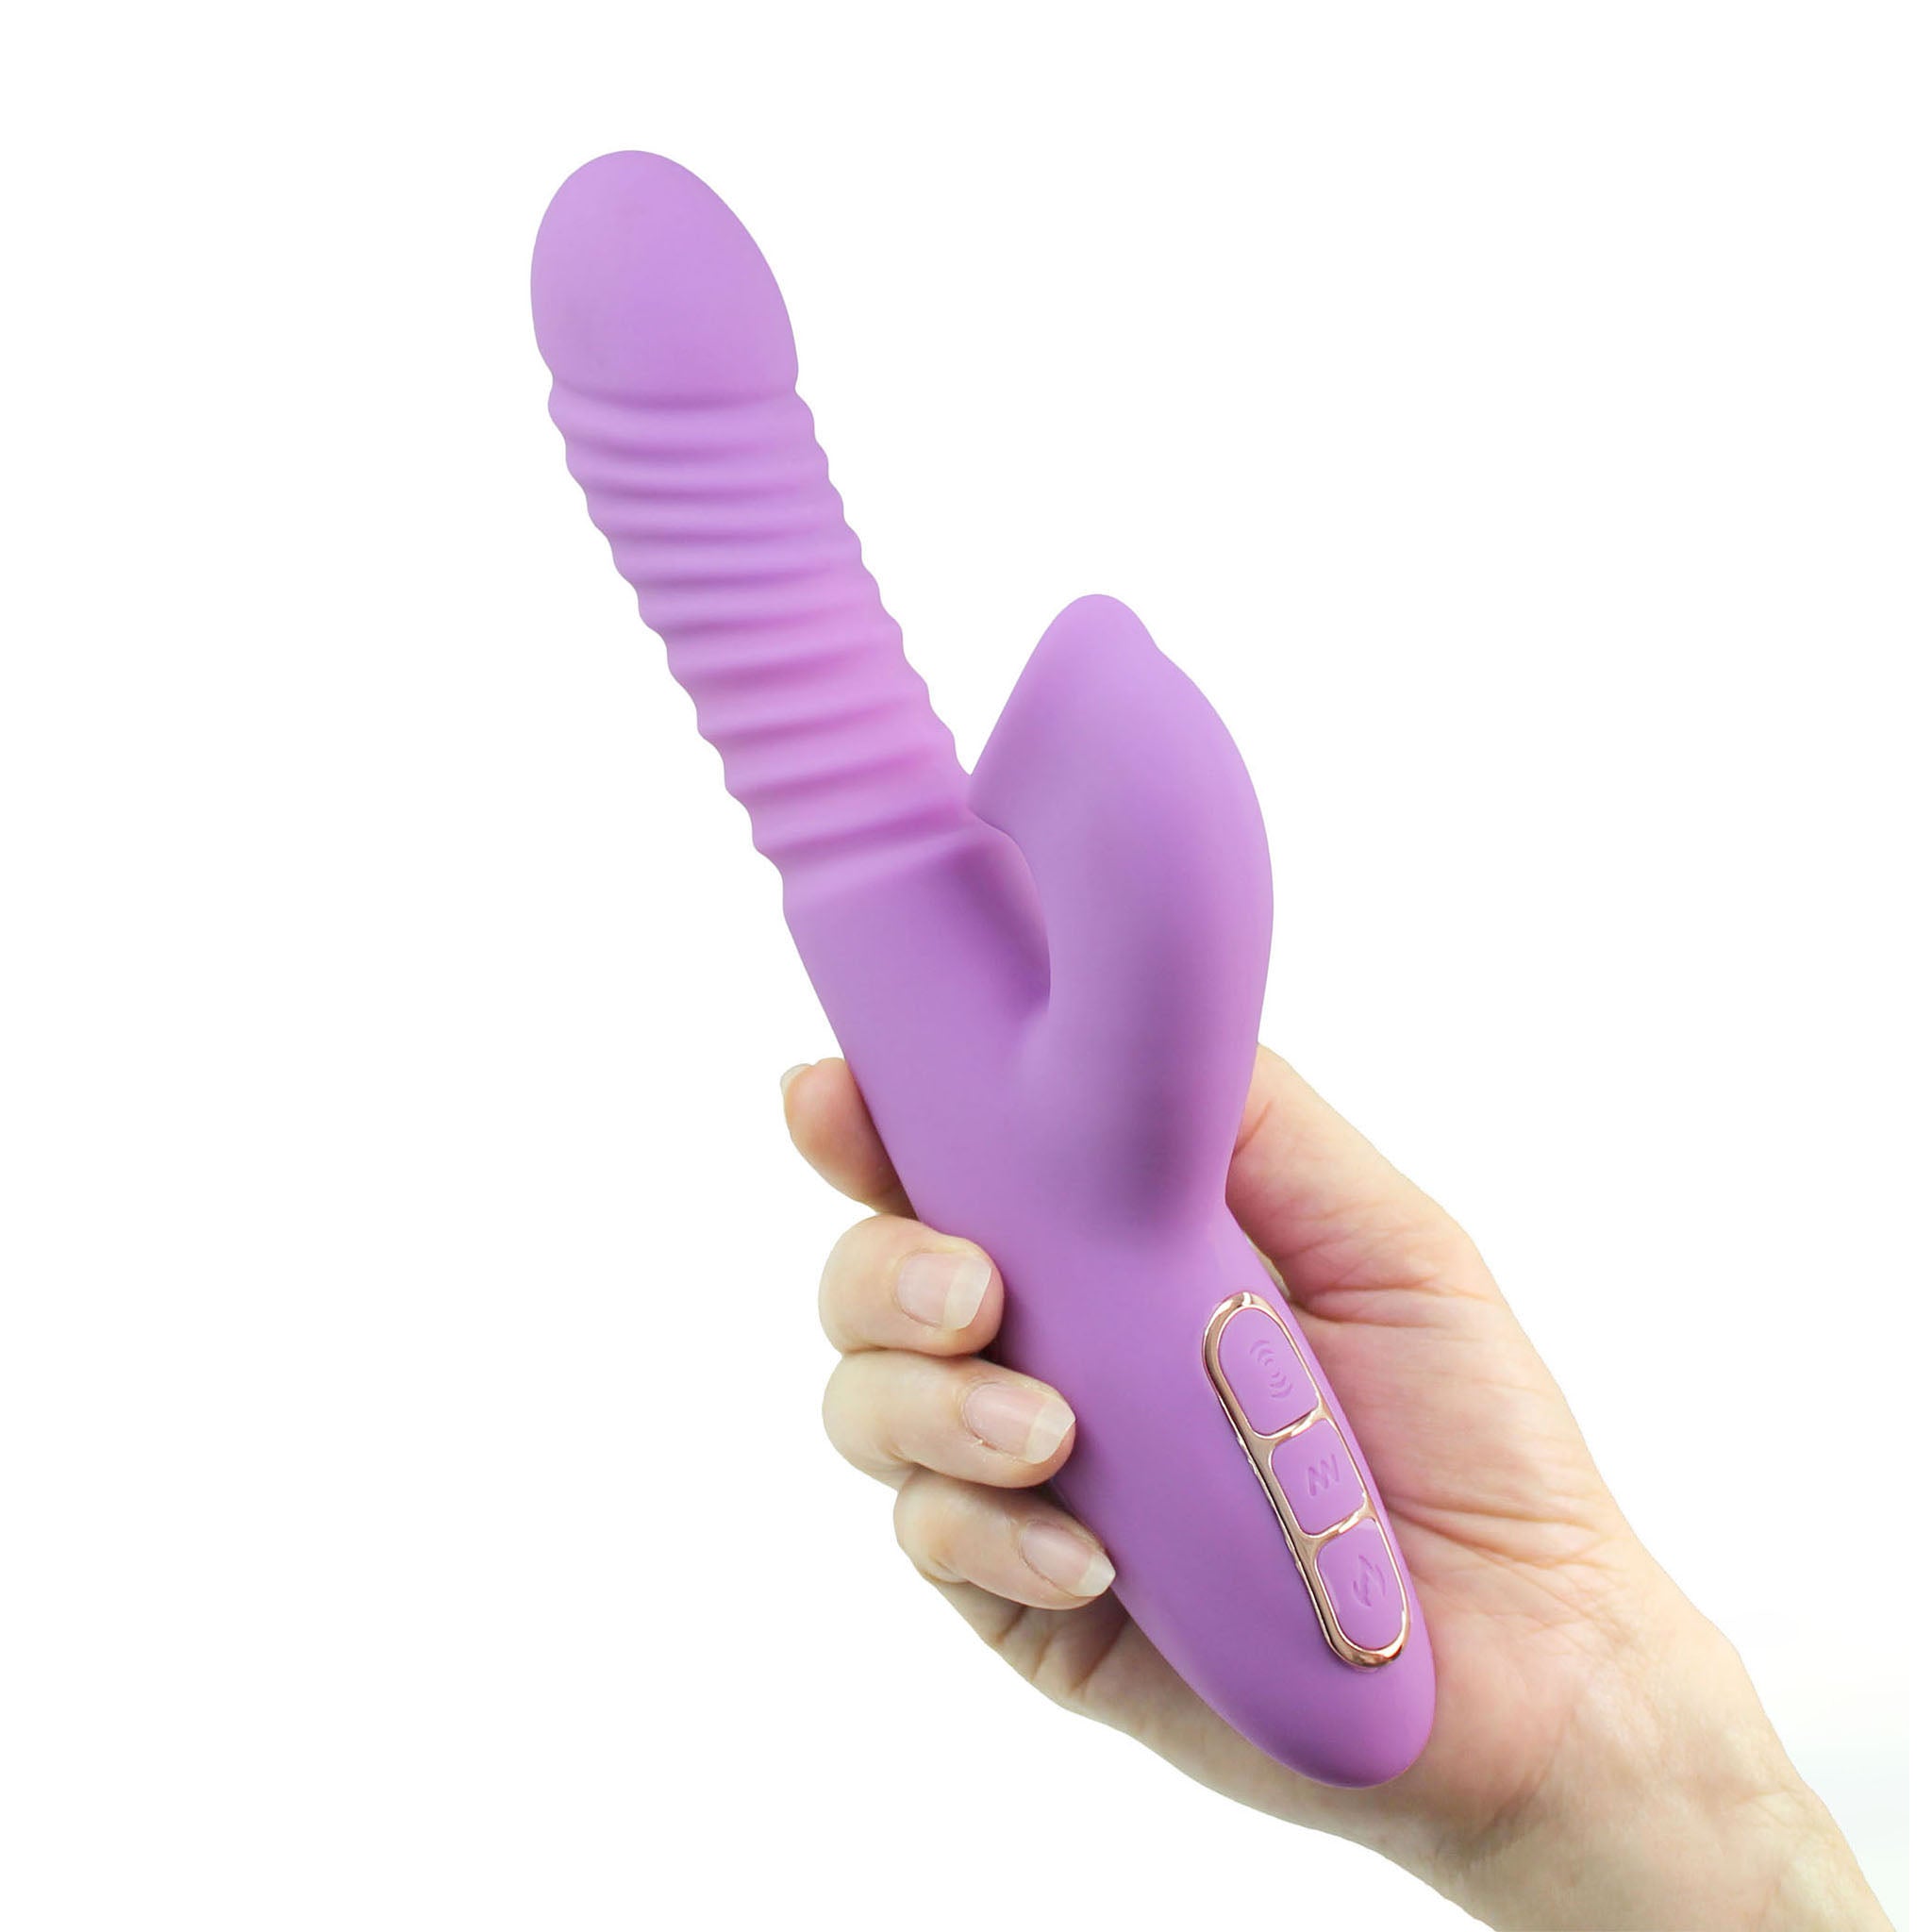 Clitoral Licking Thrusting Stroking Rabbit Vibrator Sex-toys for Women Couples